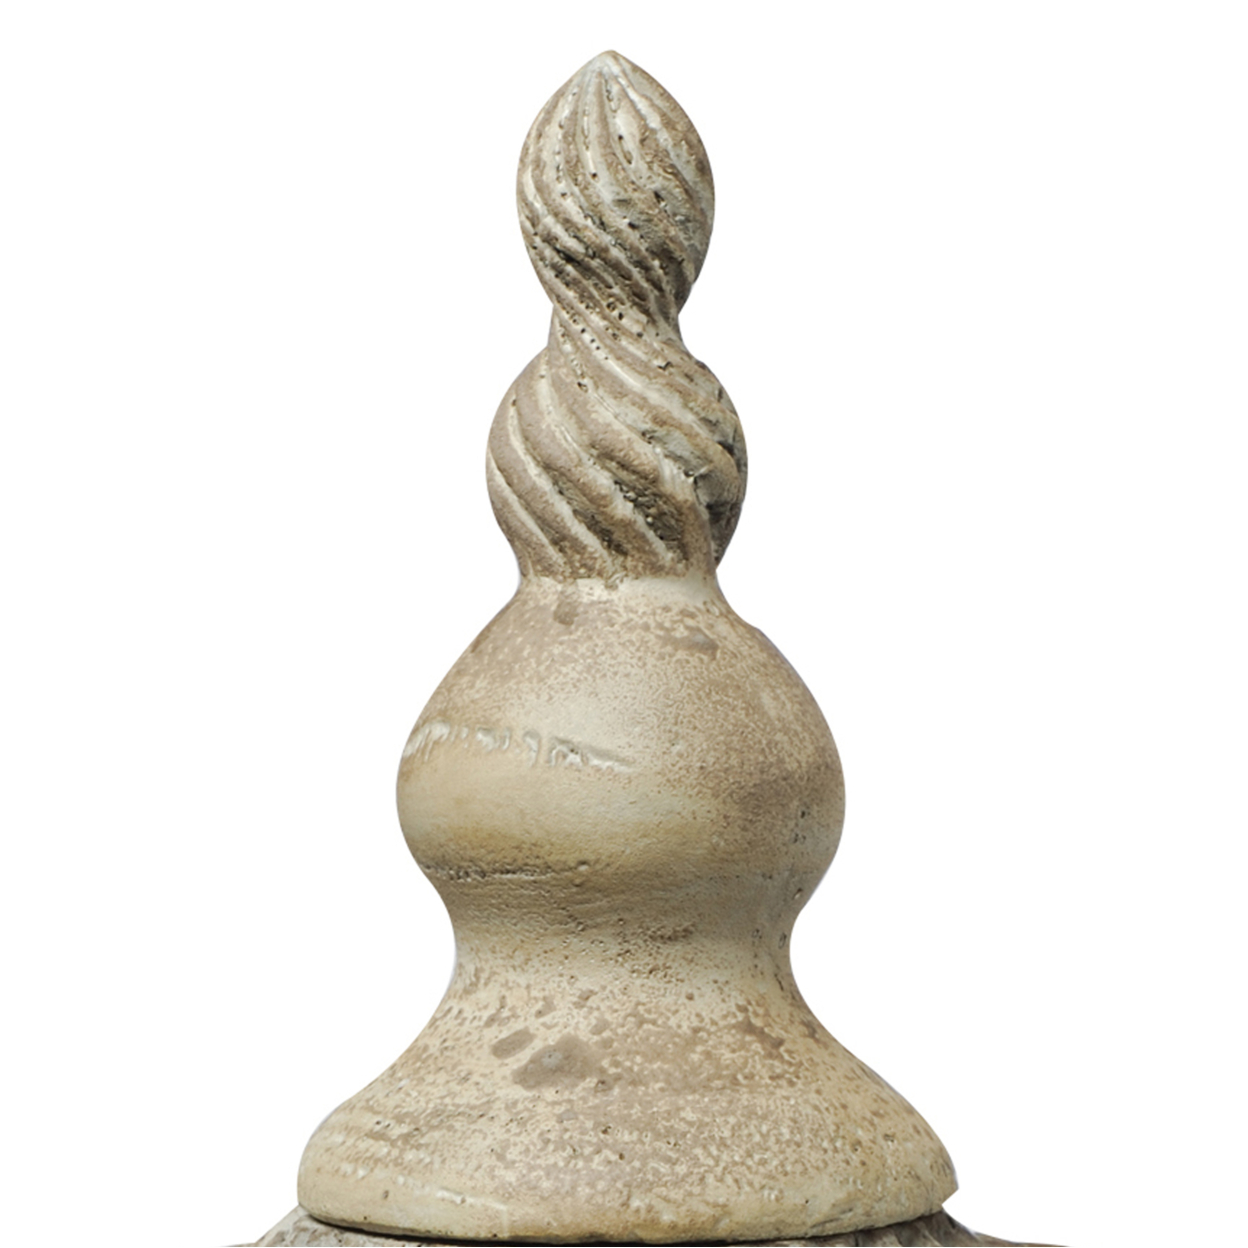 22 Inch Lidded Vase With Turned Finial Design And Swirl Pattern, White- Saltoro Sherpi